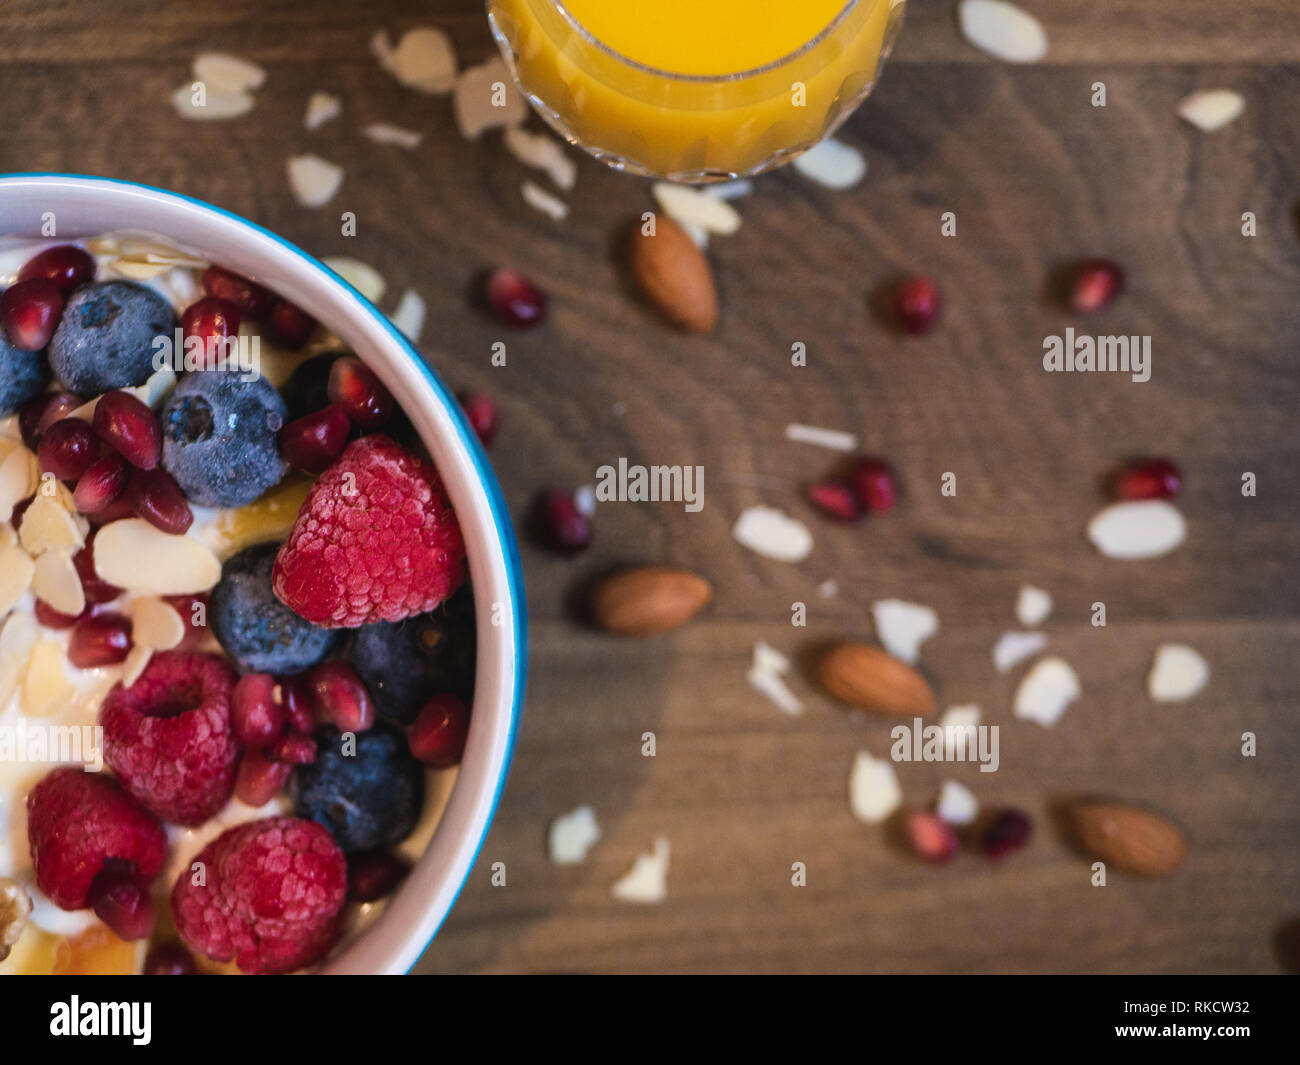 Delicious and healthy breakfast bowl with raspberry, blueberry, almond, pomegranate, walnuts and soy yogurt Stock Photo